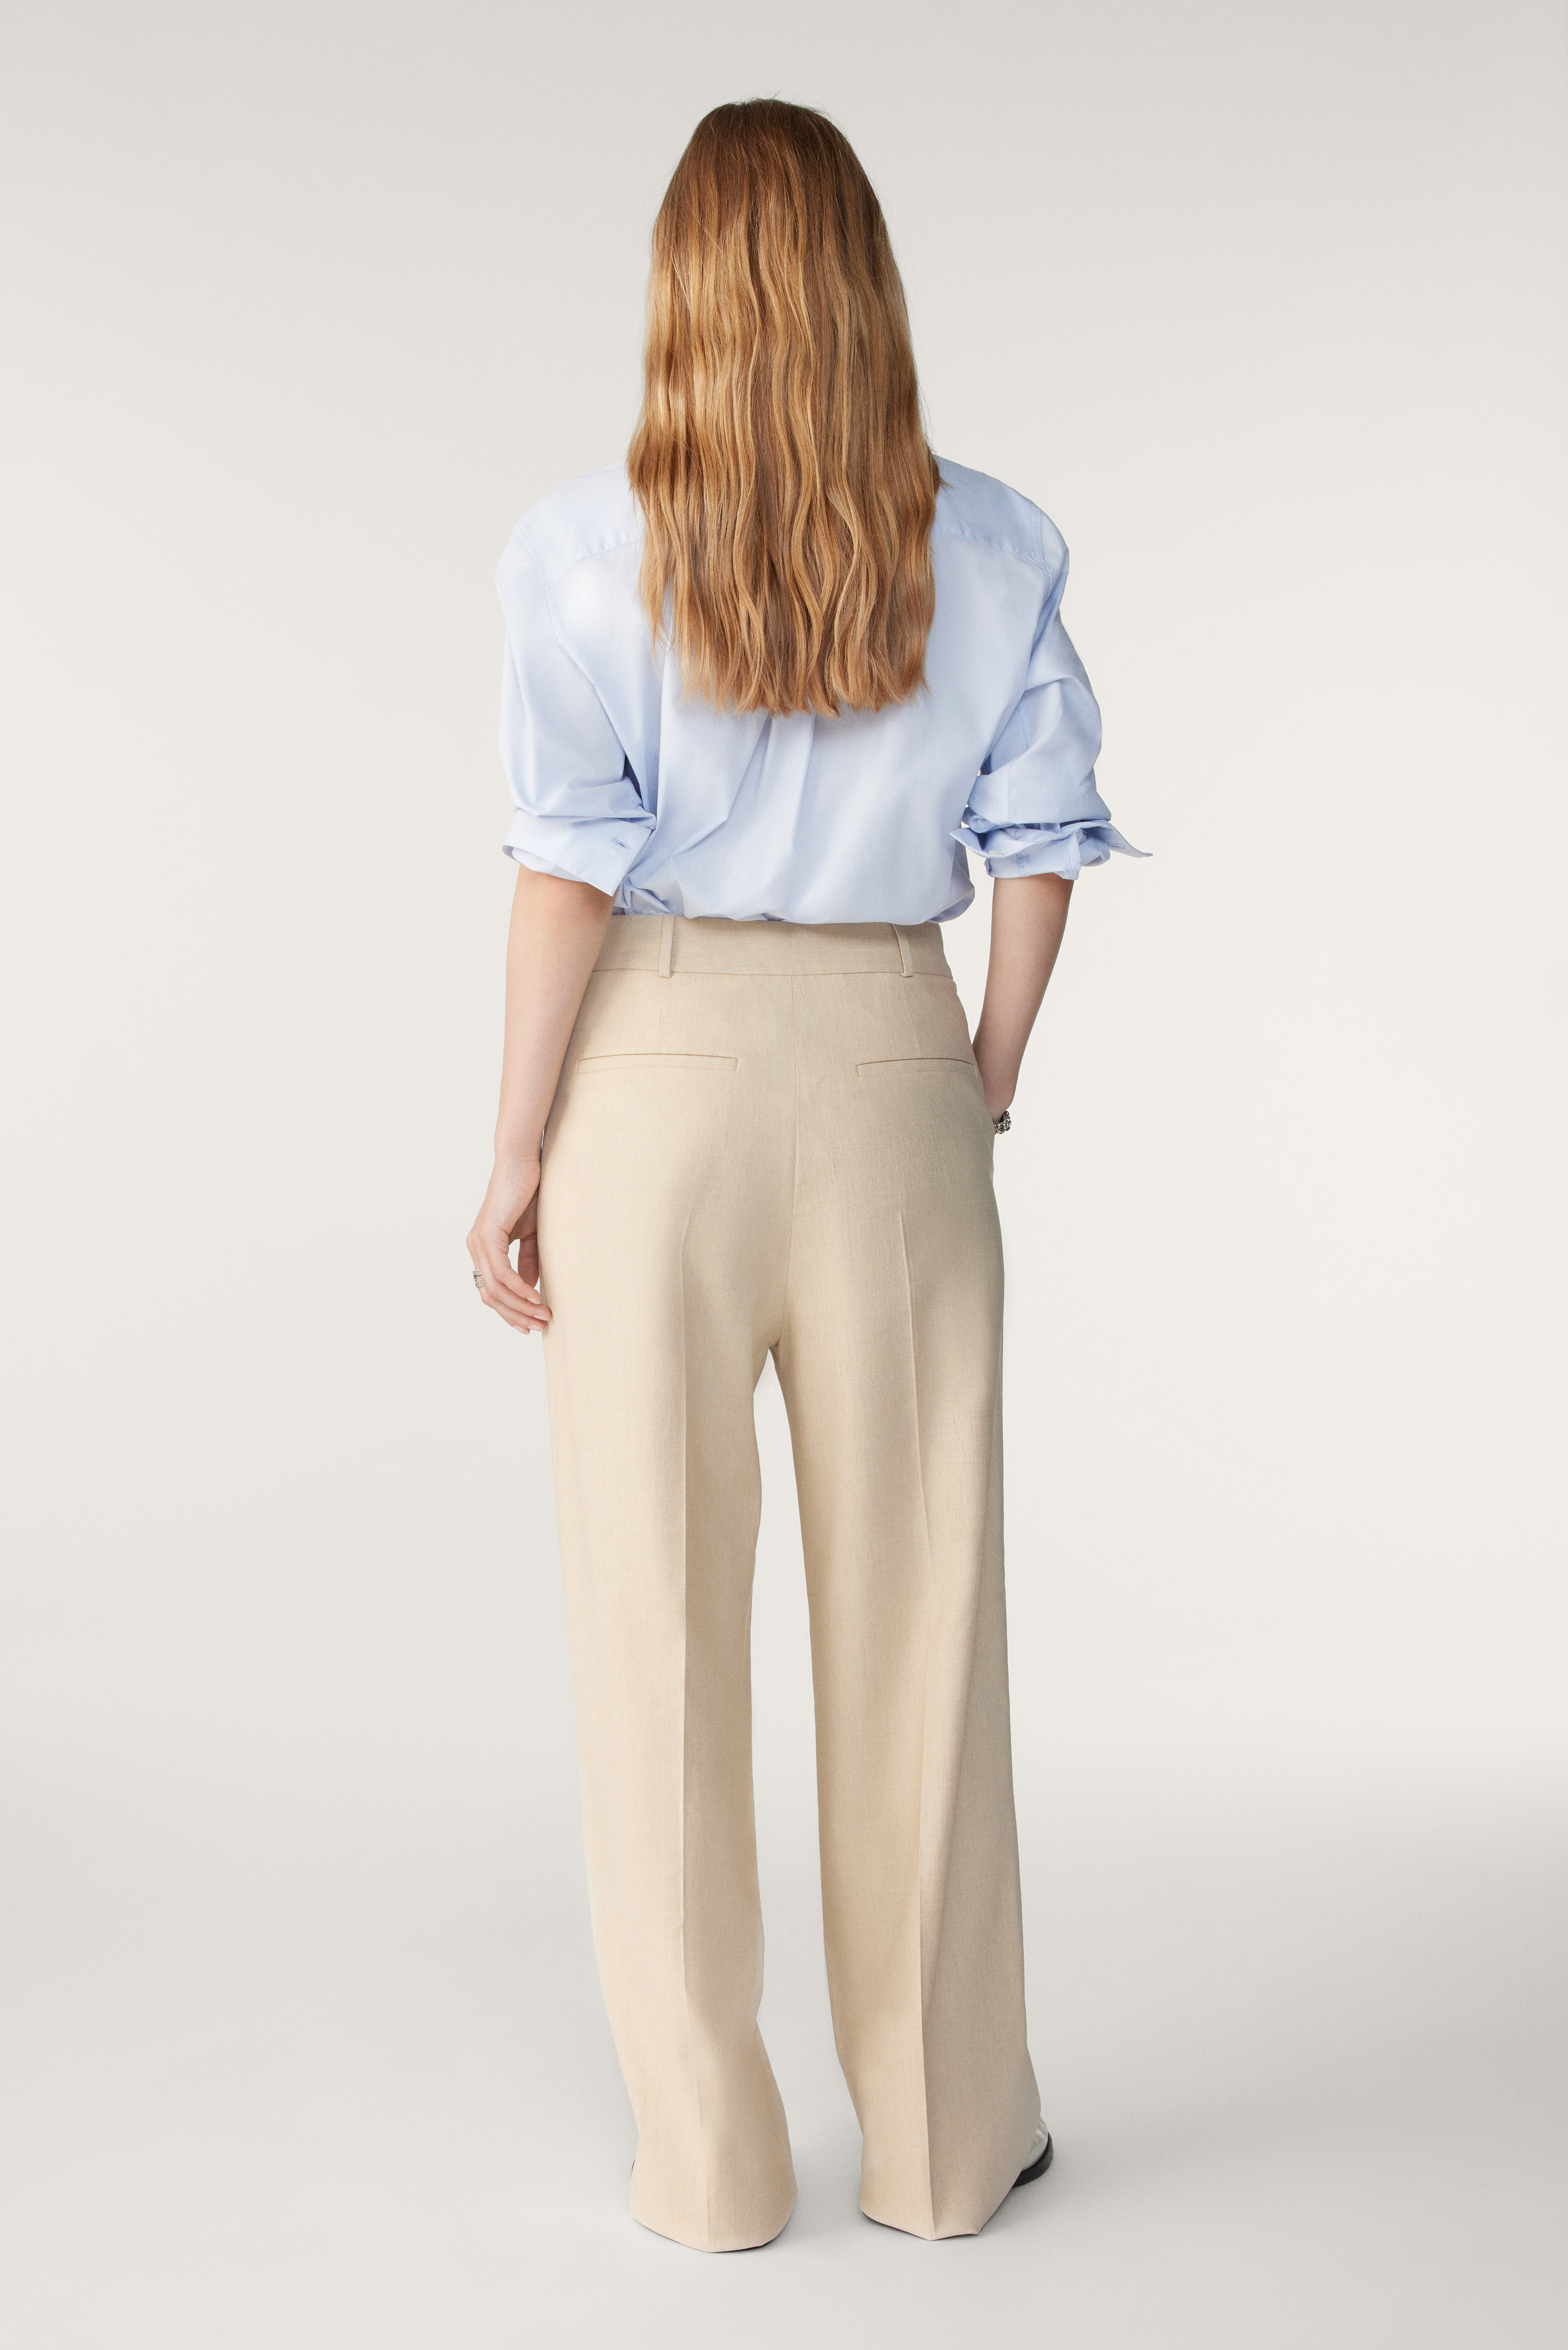 Three ways how to style beige wide leg pants | Gallery posted by  iammarina.zl | Lemon8